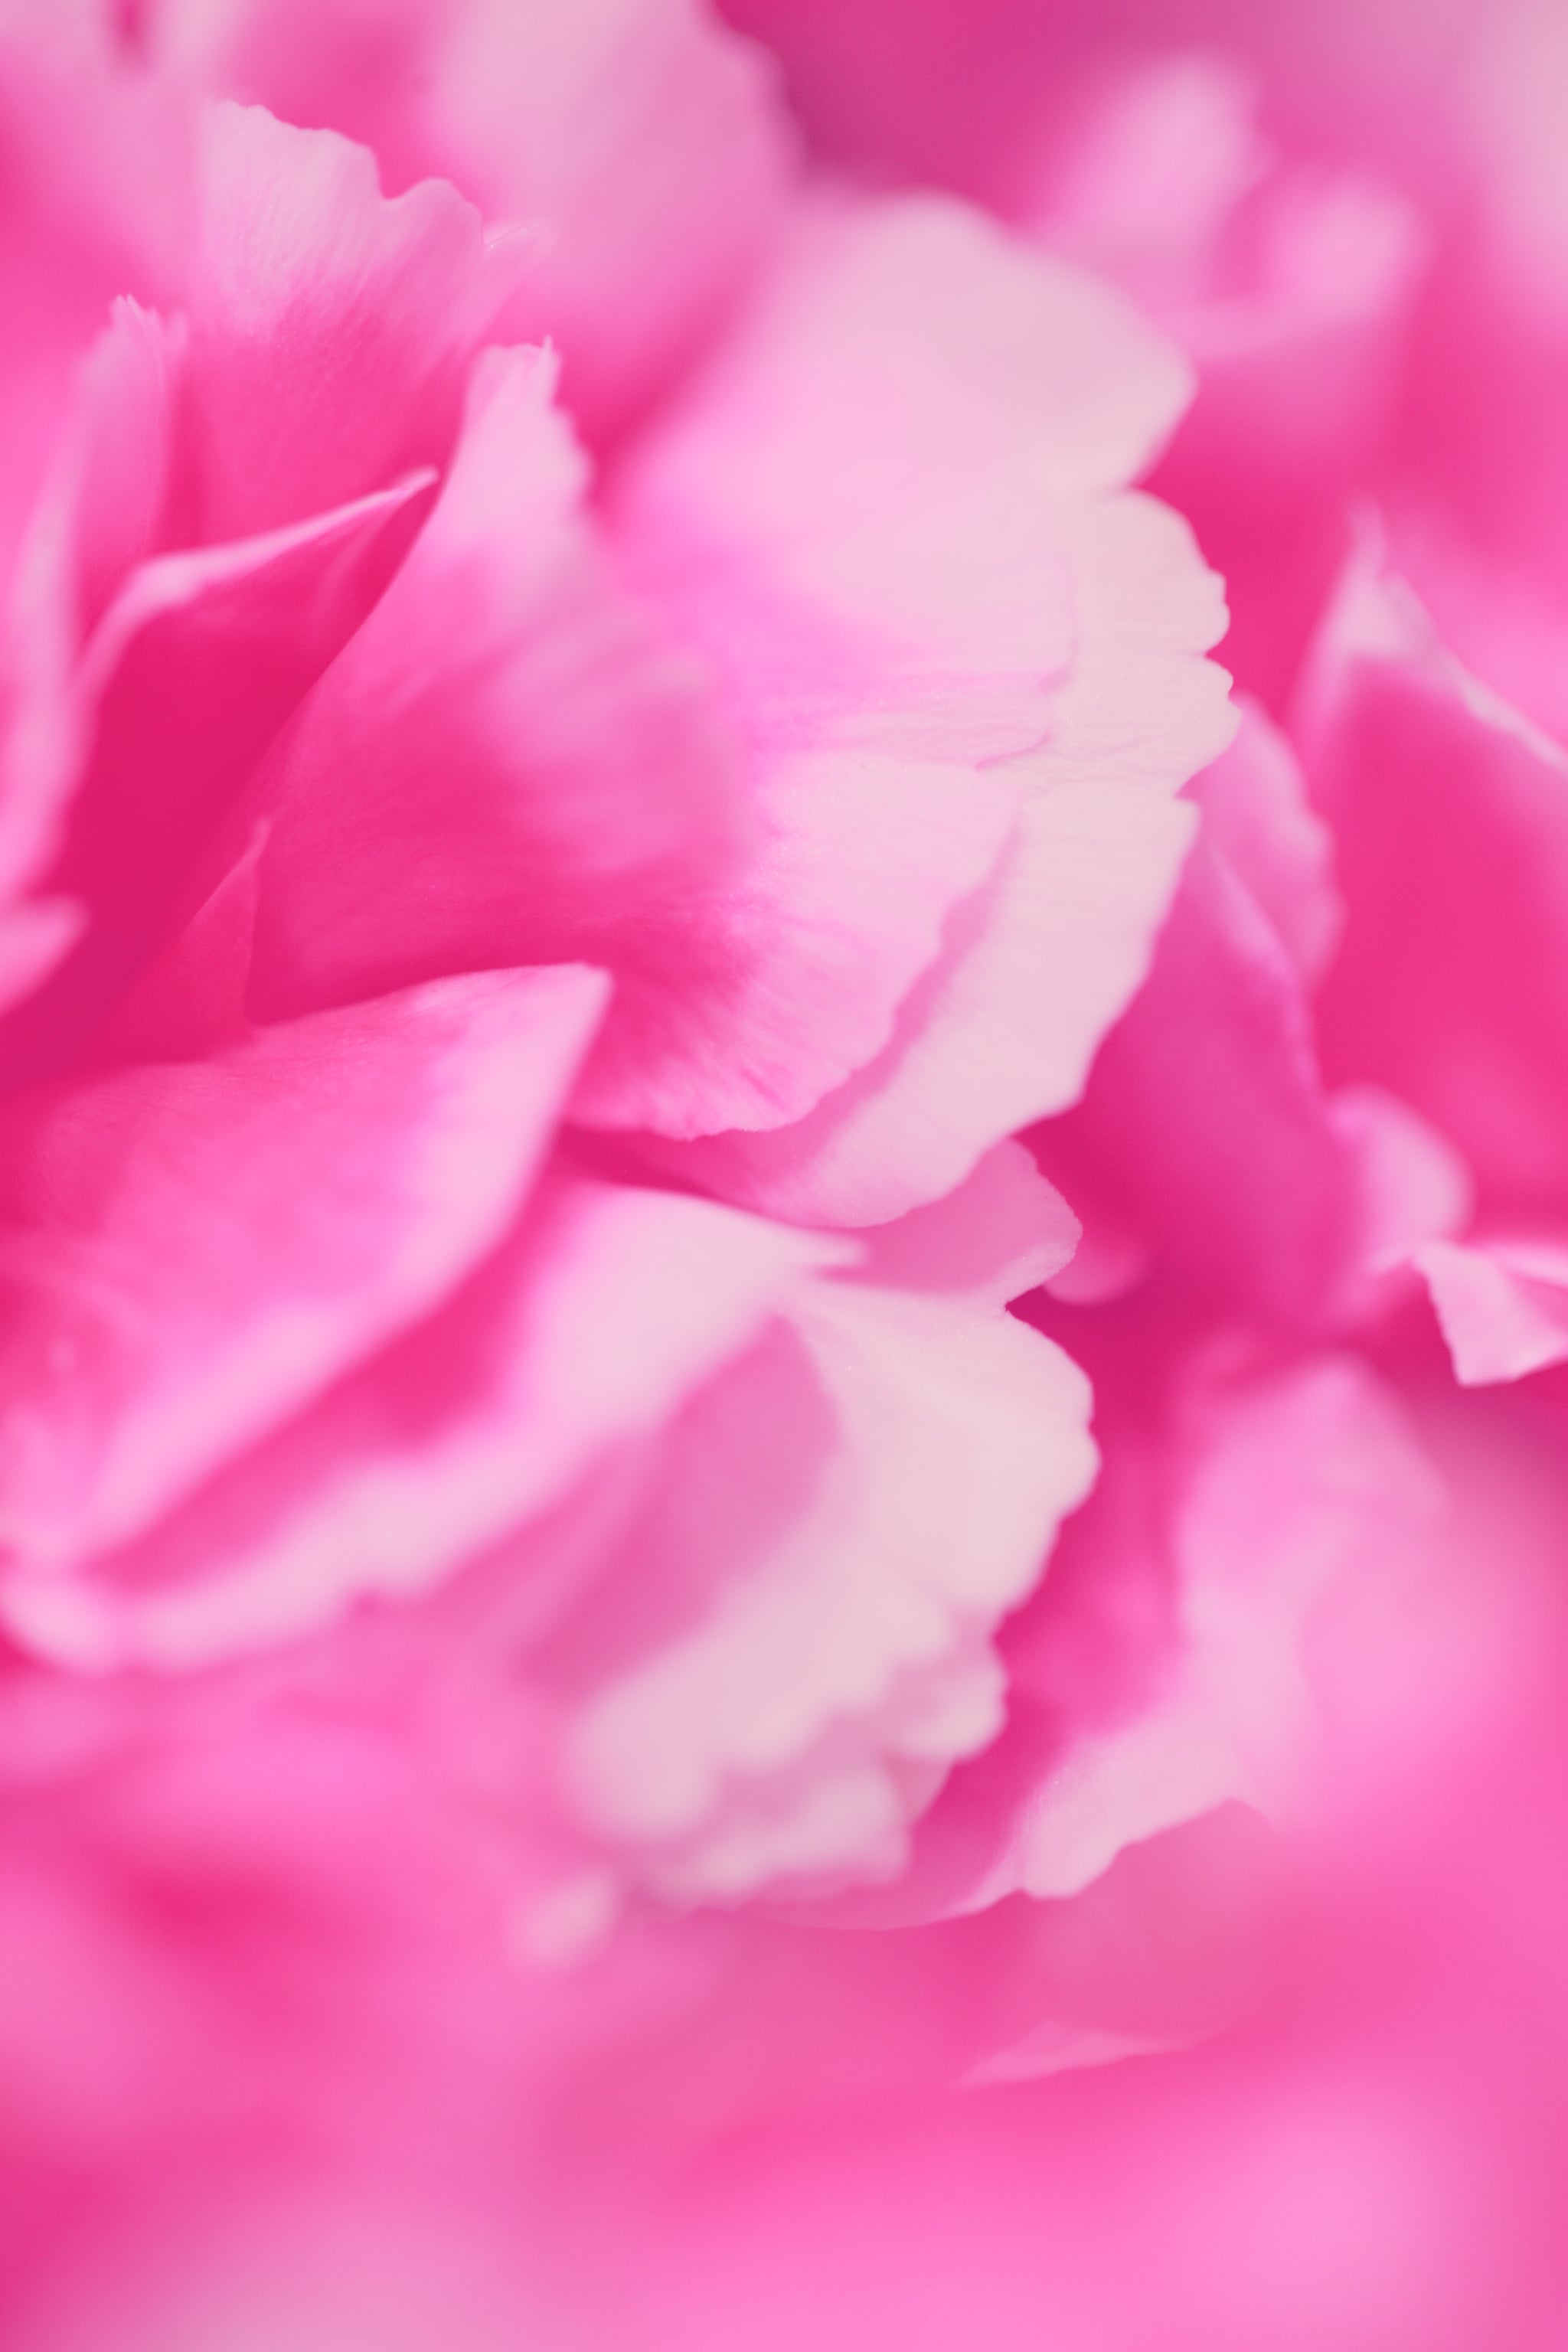 Pink Petals Valentine's Day iPhone Wallpaper. The Dreamiest iPhone Wallpaper For Valentine's Day That Fit Any Aesthetic